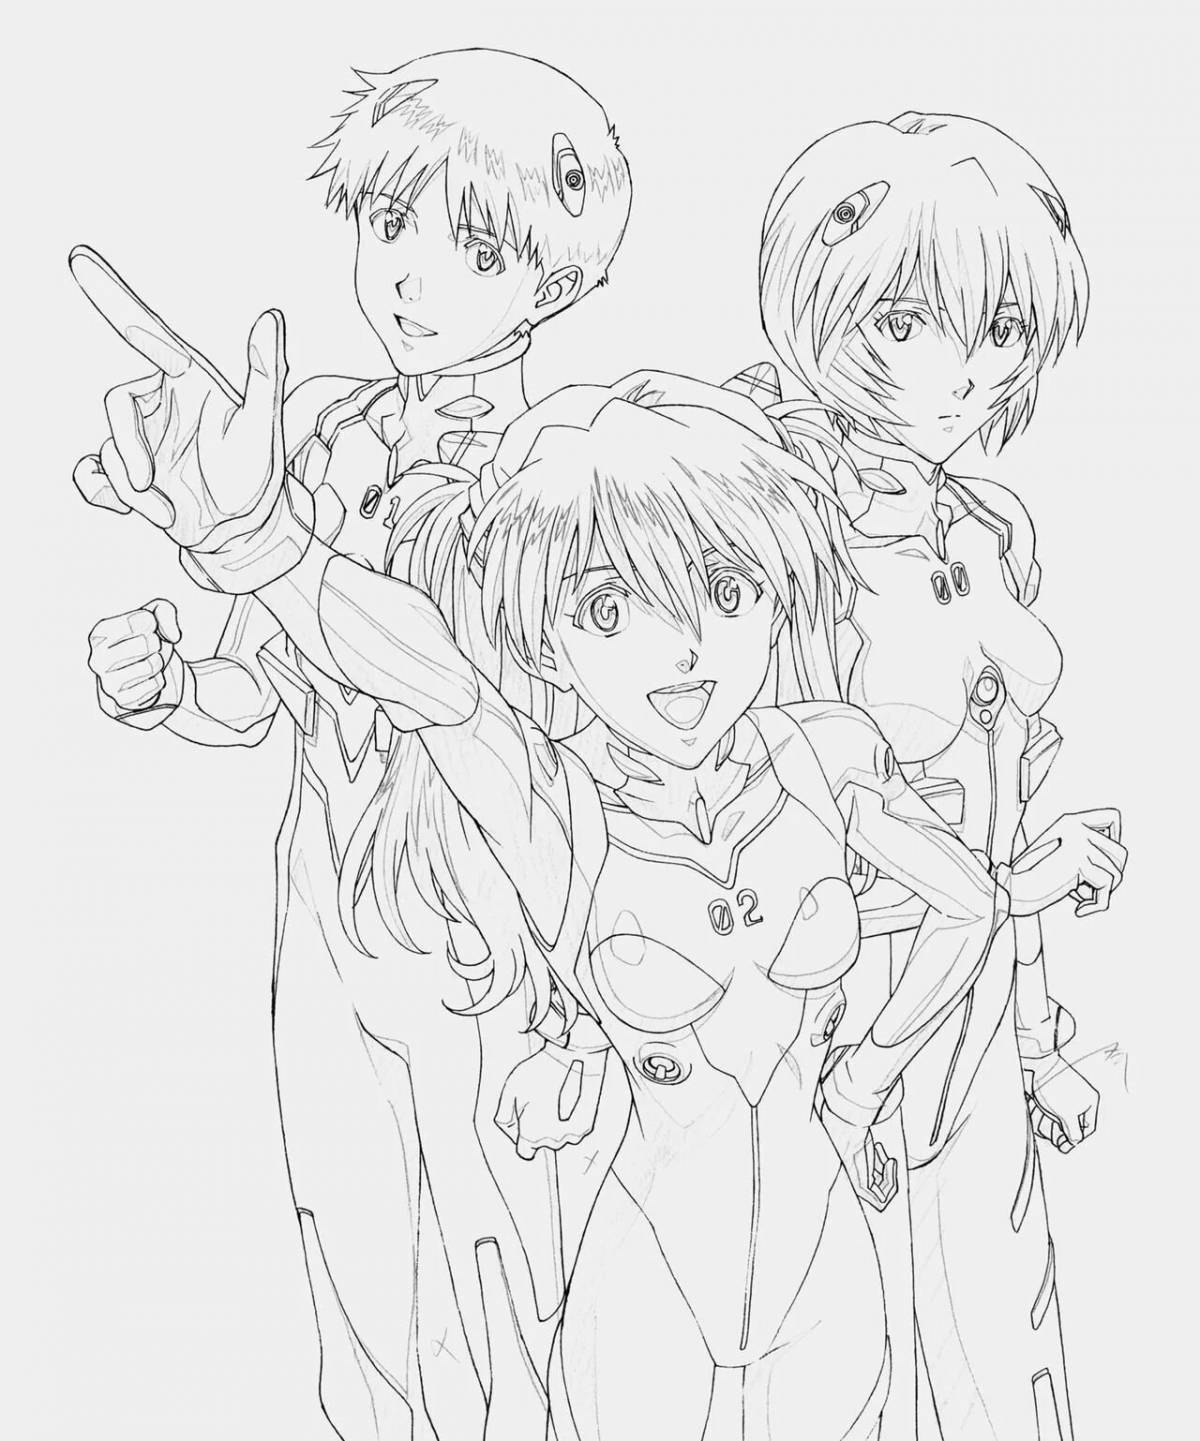 Exciting evangelion coloring book